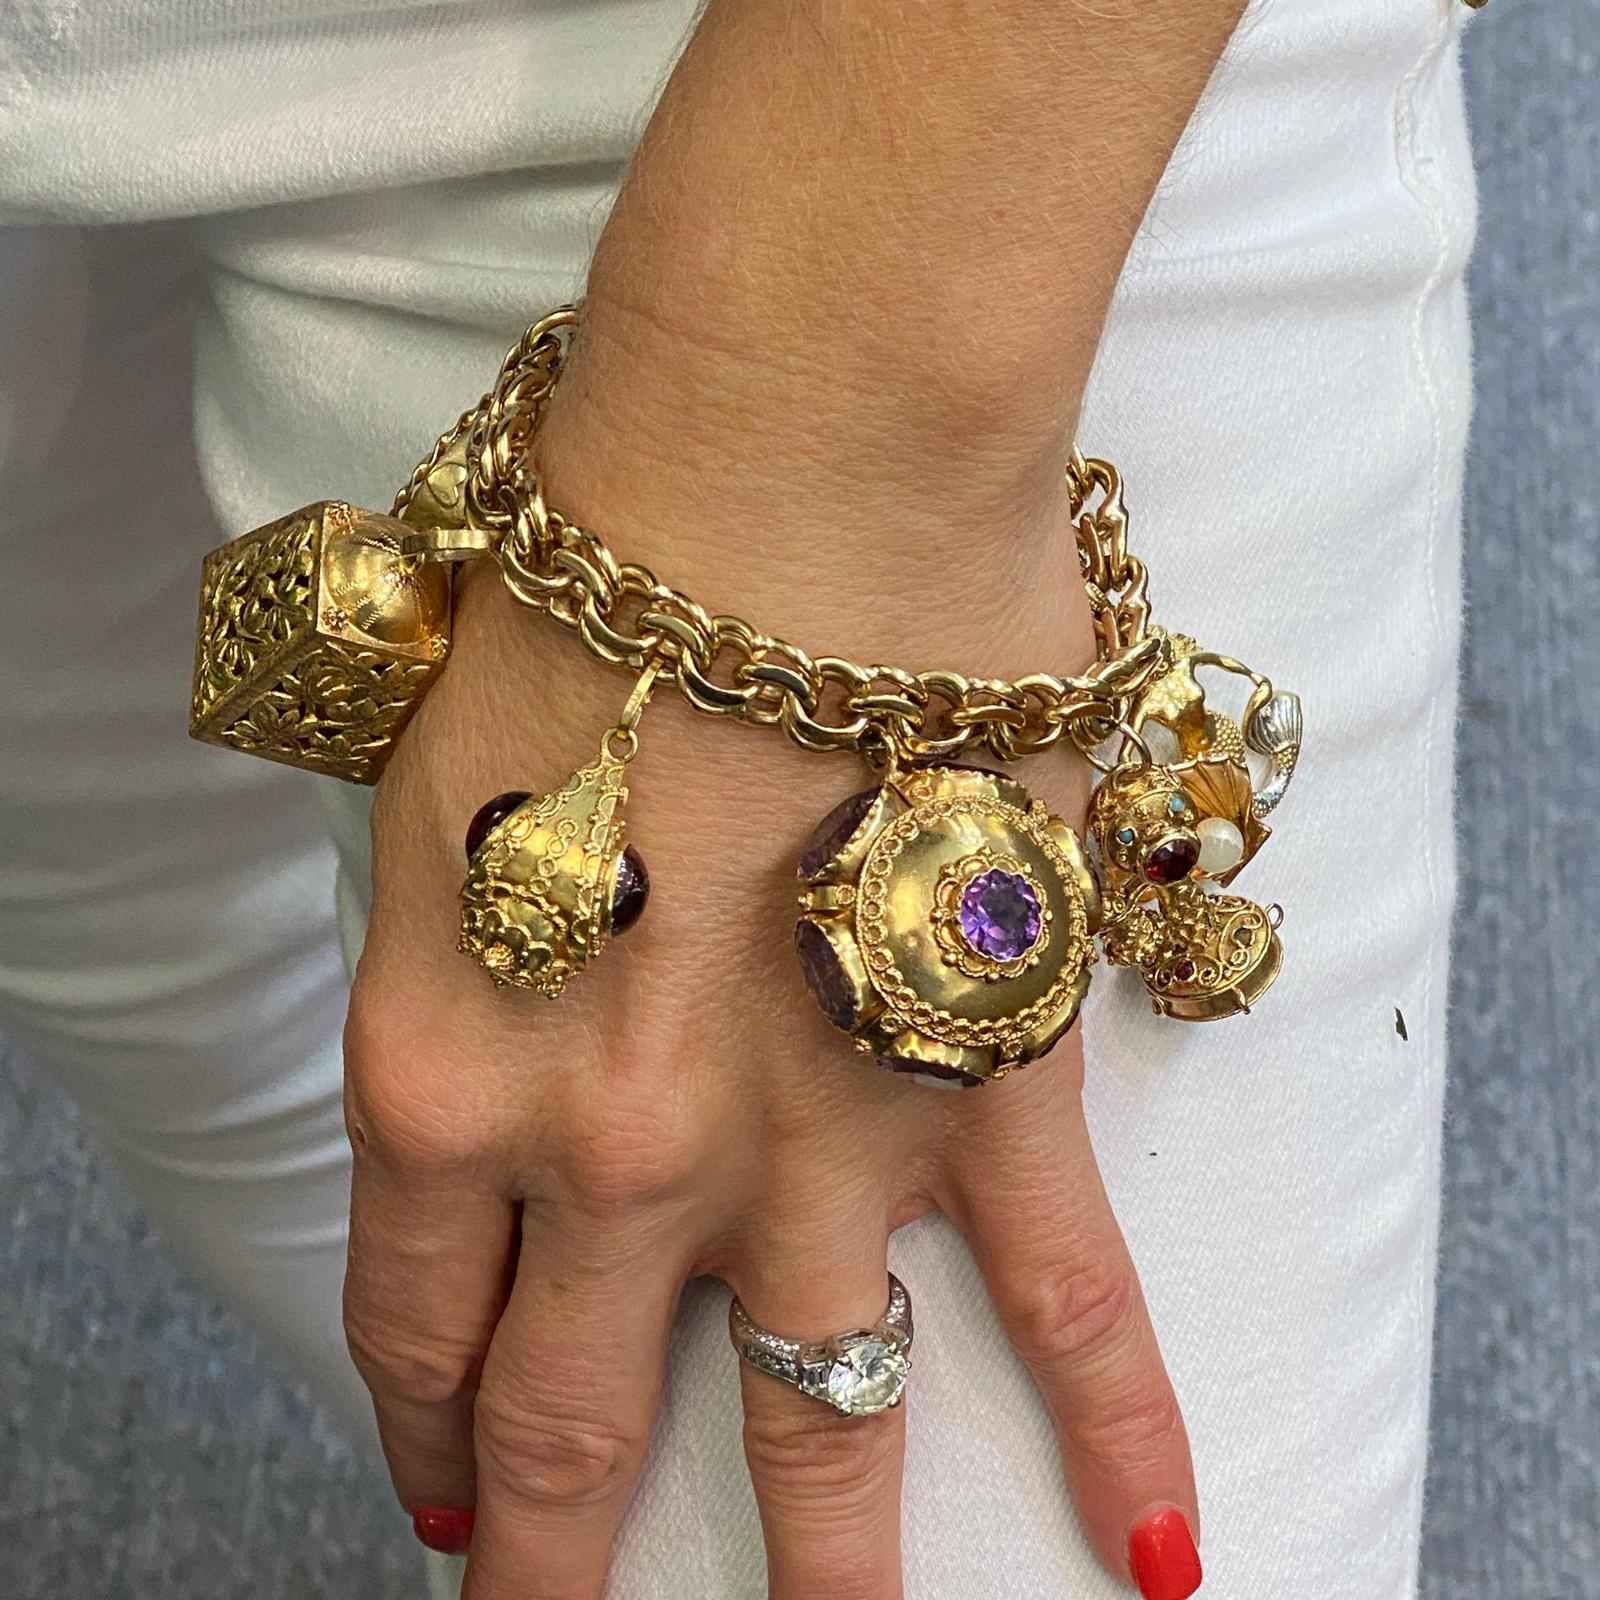 Fabulous charm bracelet fashioned in 14 and 18 karat yellow gold. The bracelet features 8 large vintage charms featuring amethyst and garnet gemstones, seed pearls, and turquoise. The bracelel, which measures 7.5 inches in length, is 14 karat yellow